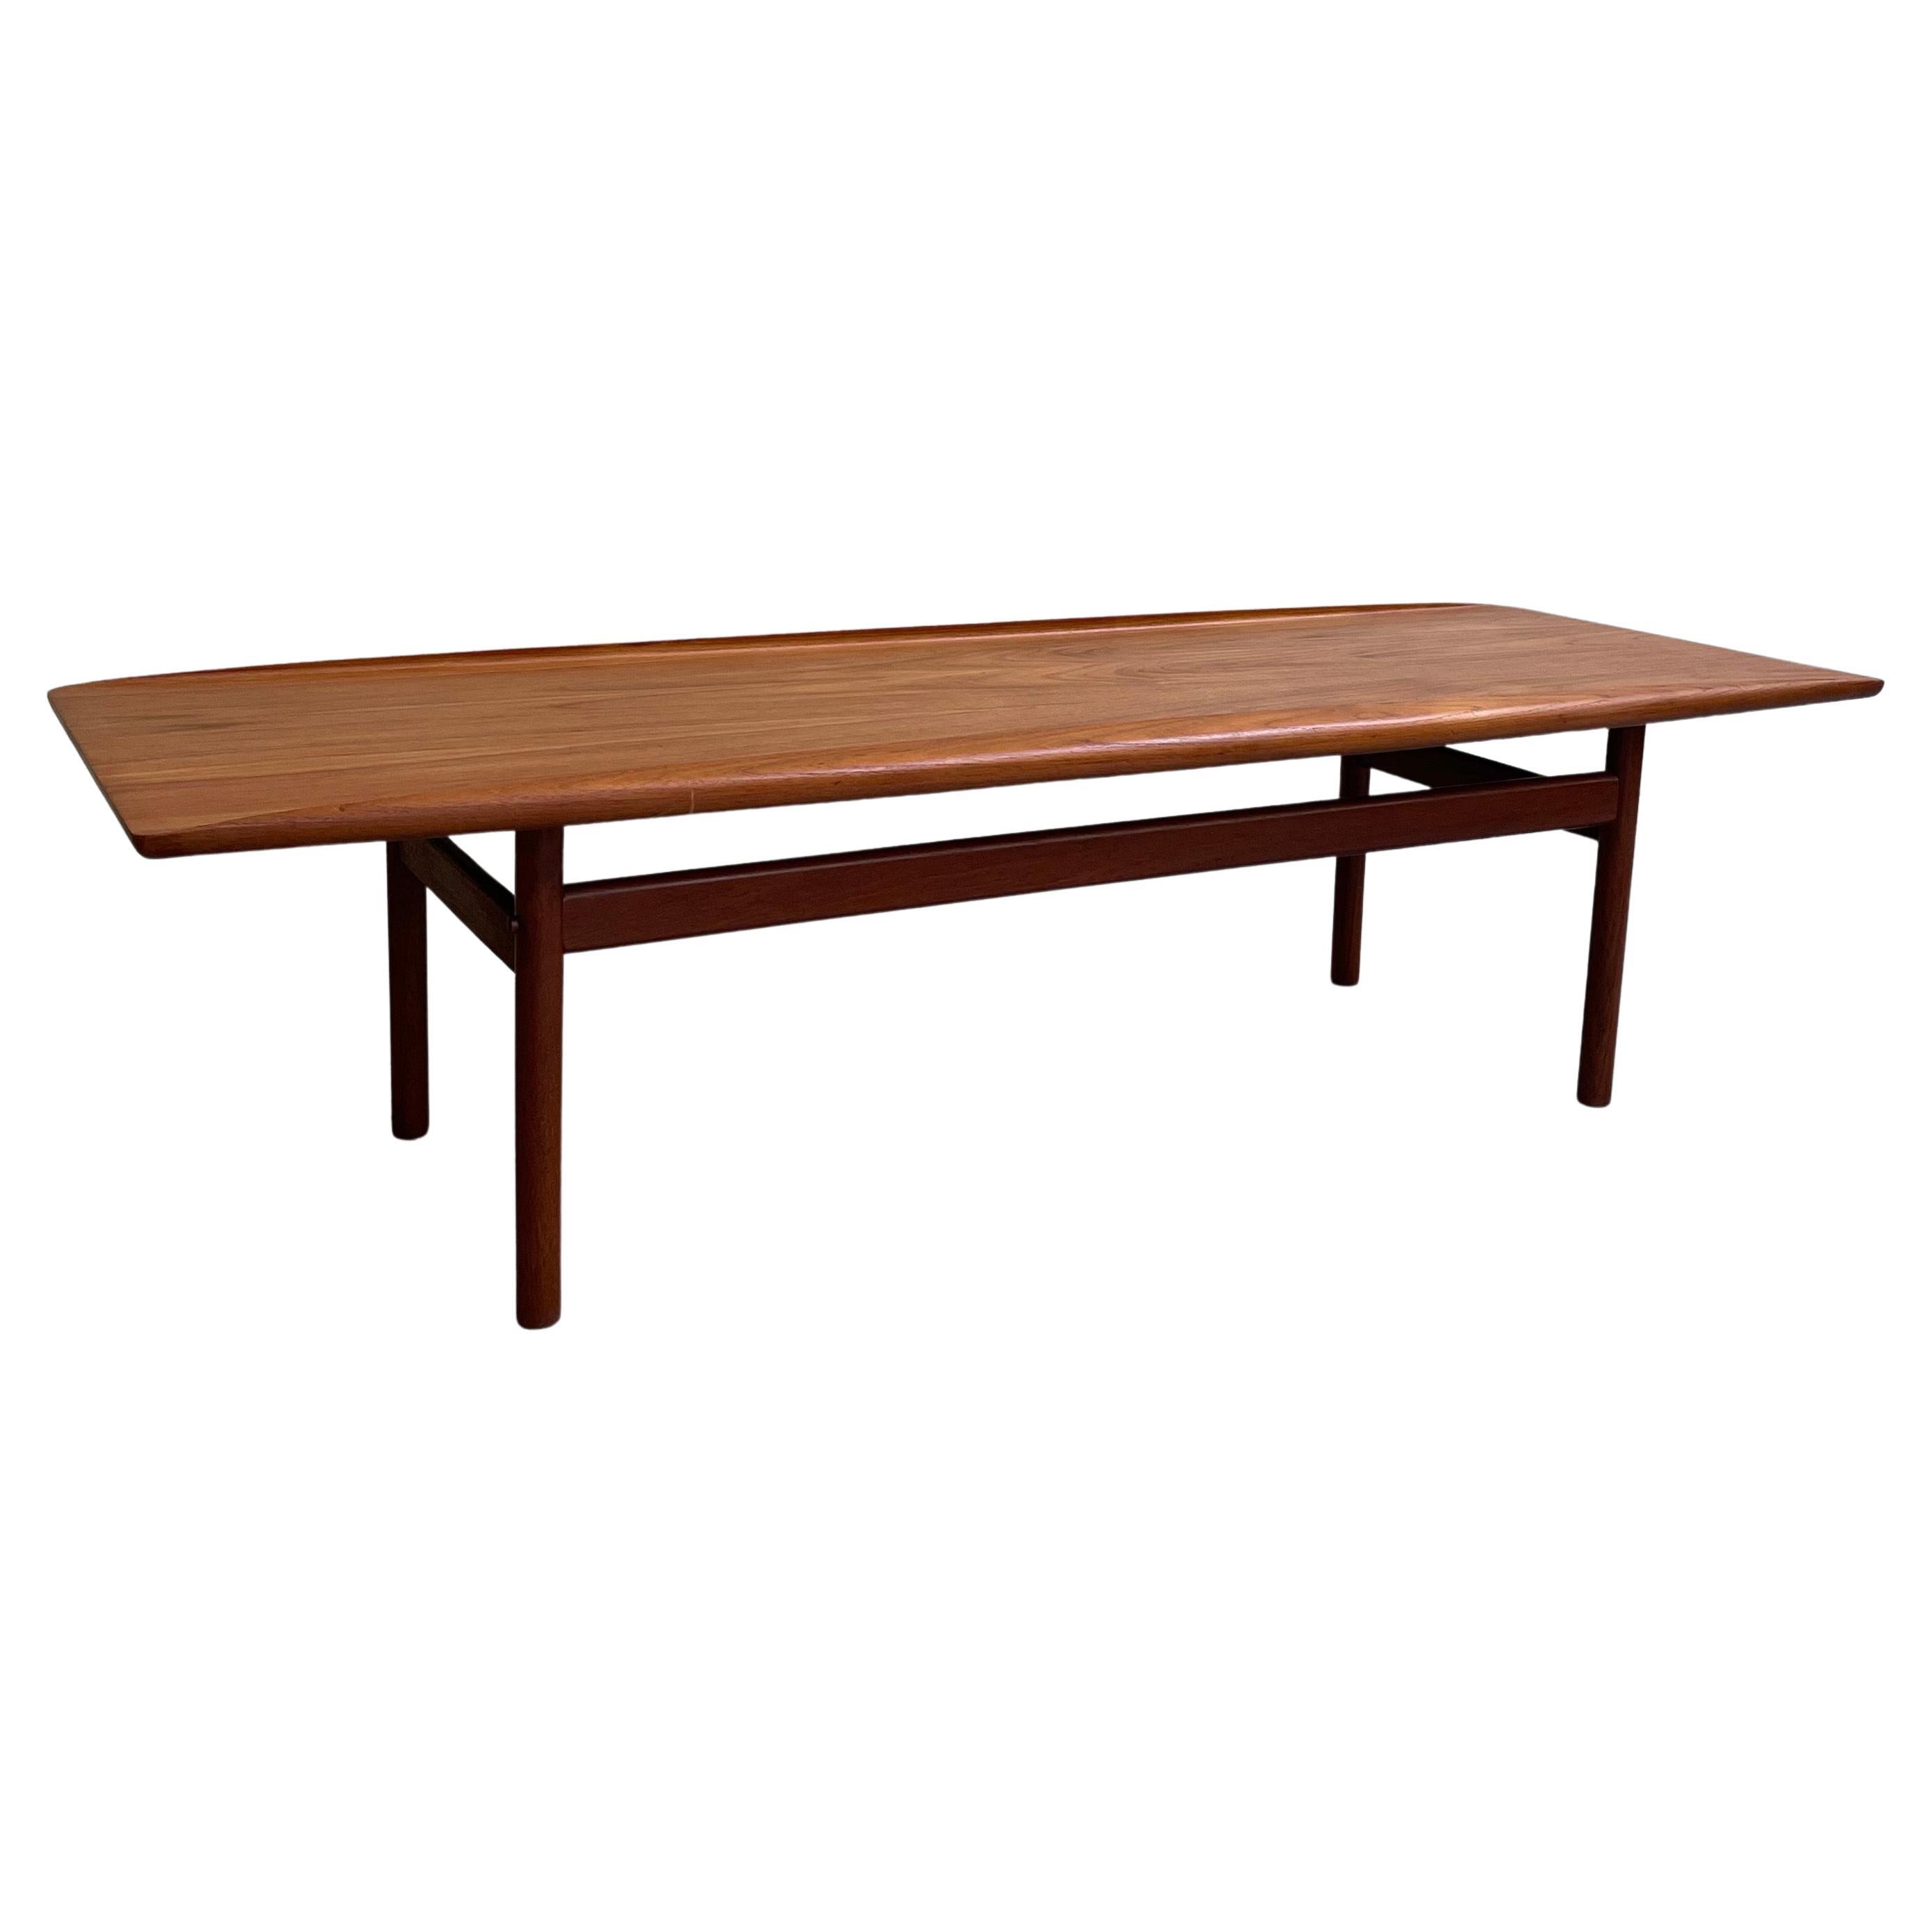 Teak Coffee Table by Grete Jalk for Poul Jeppesen